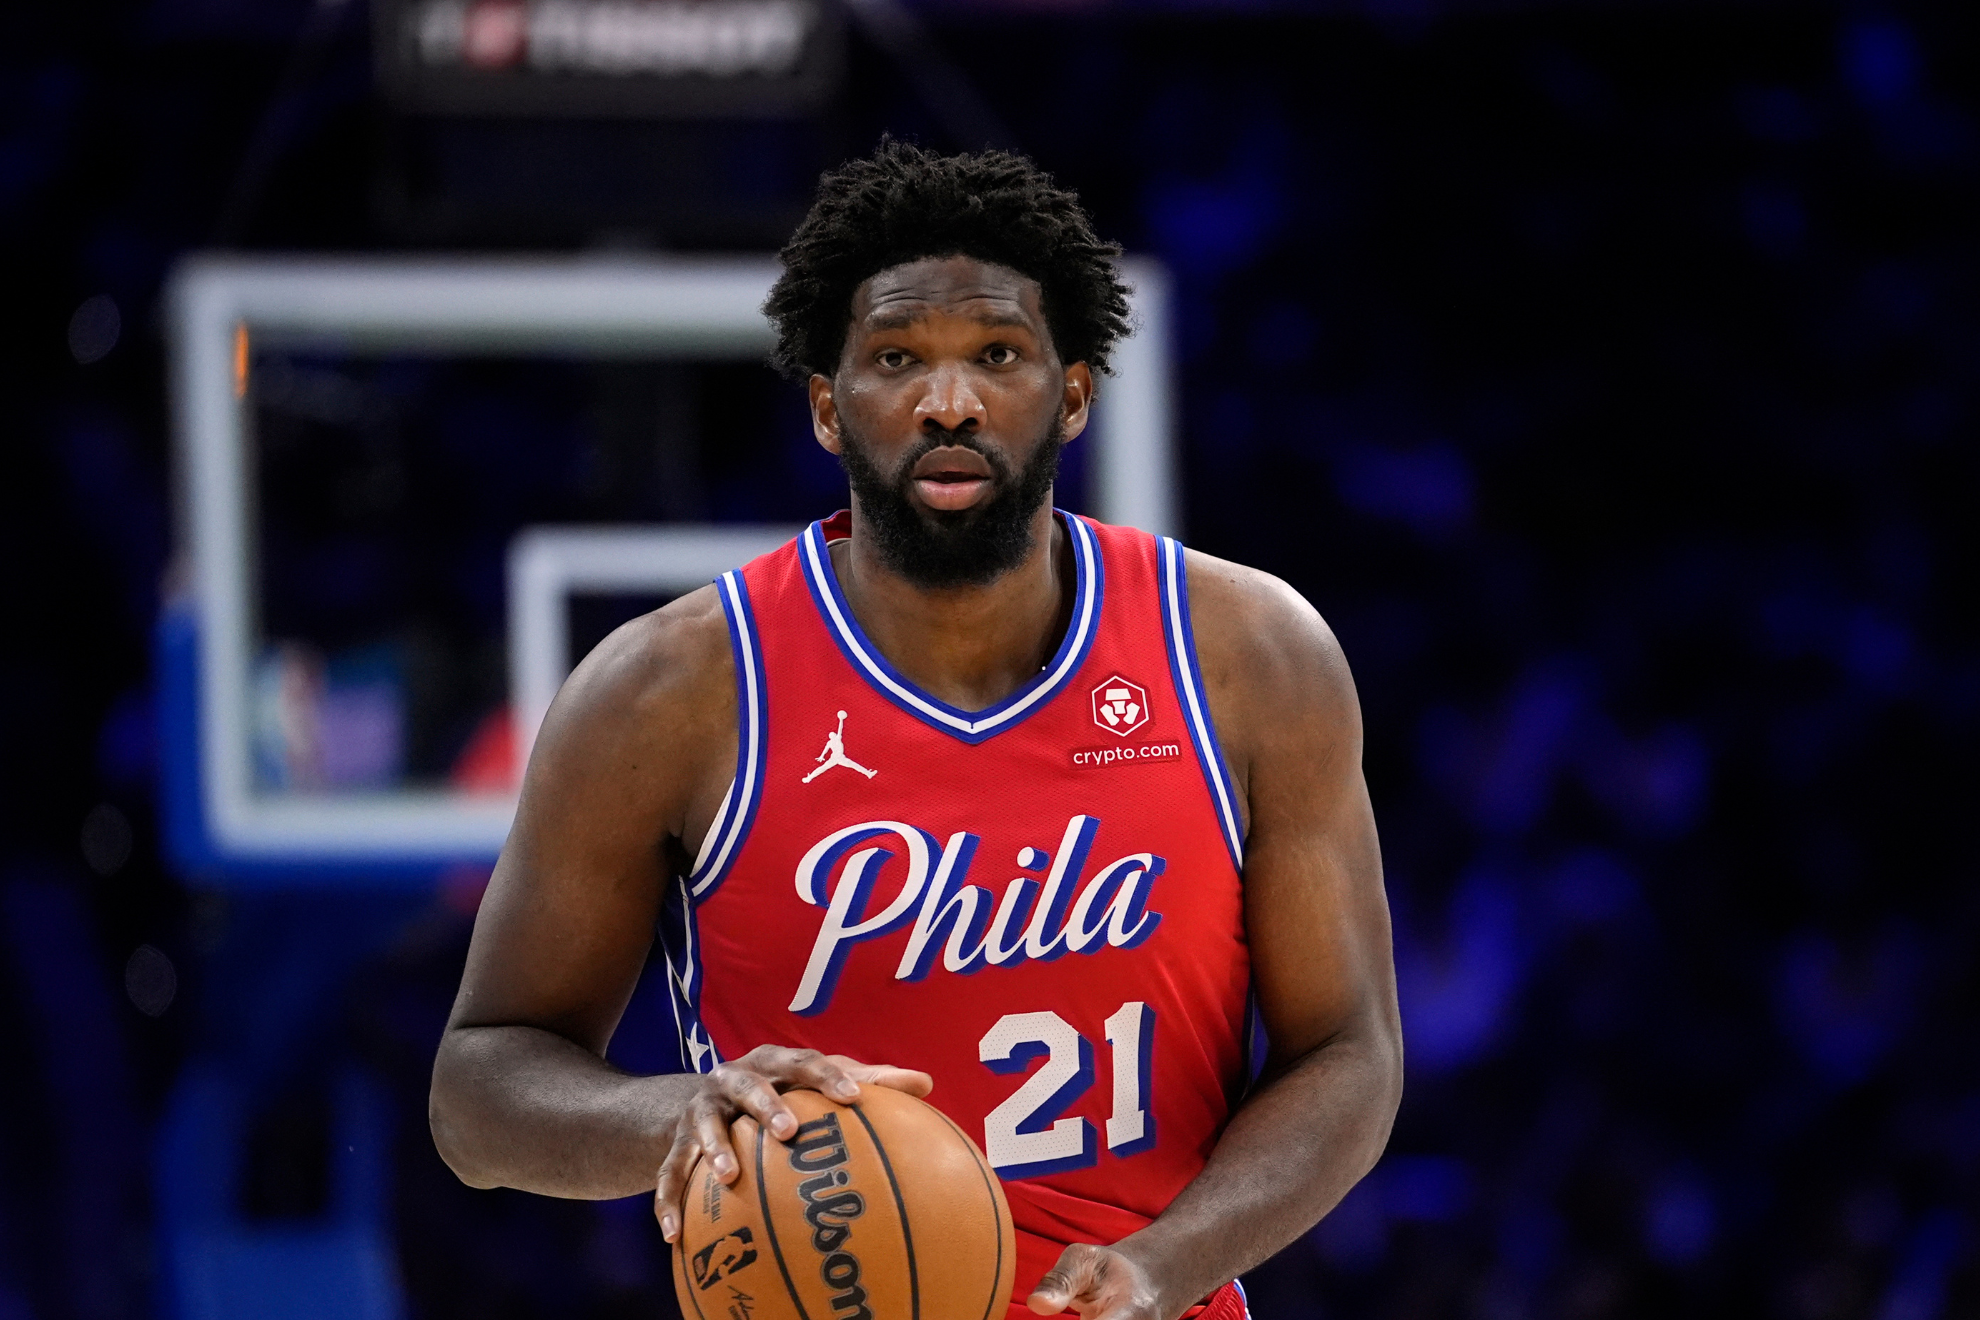 Embiid is looking to win his third consecutive scoring title.